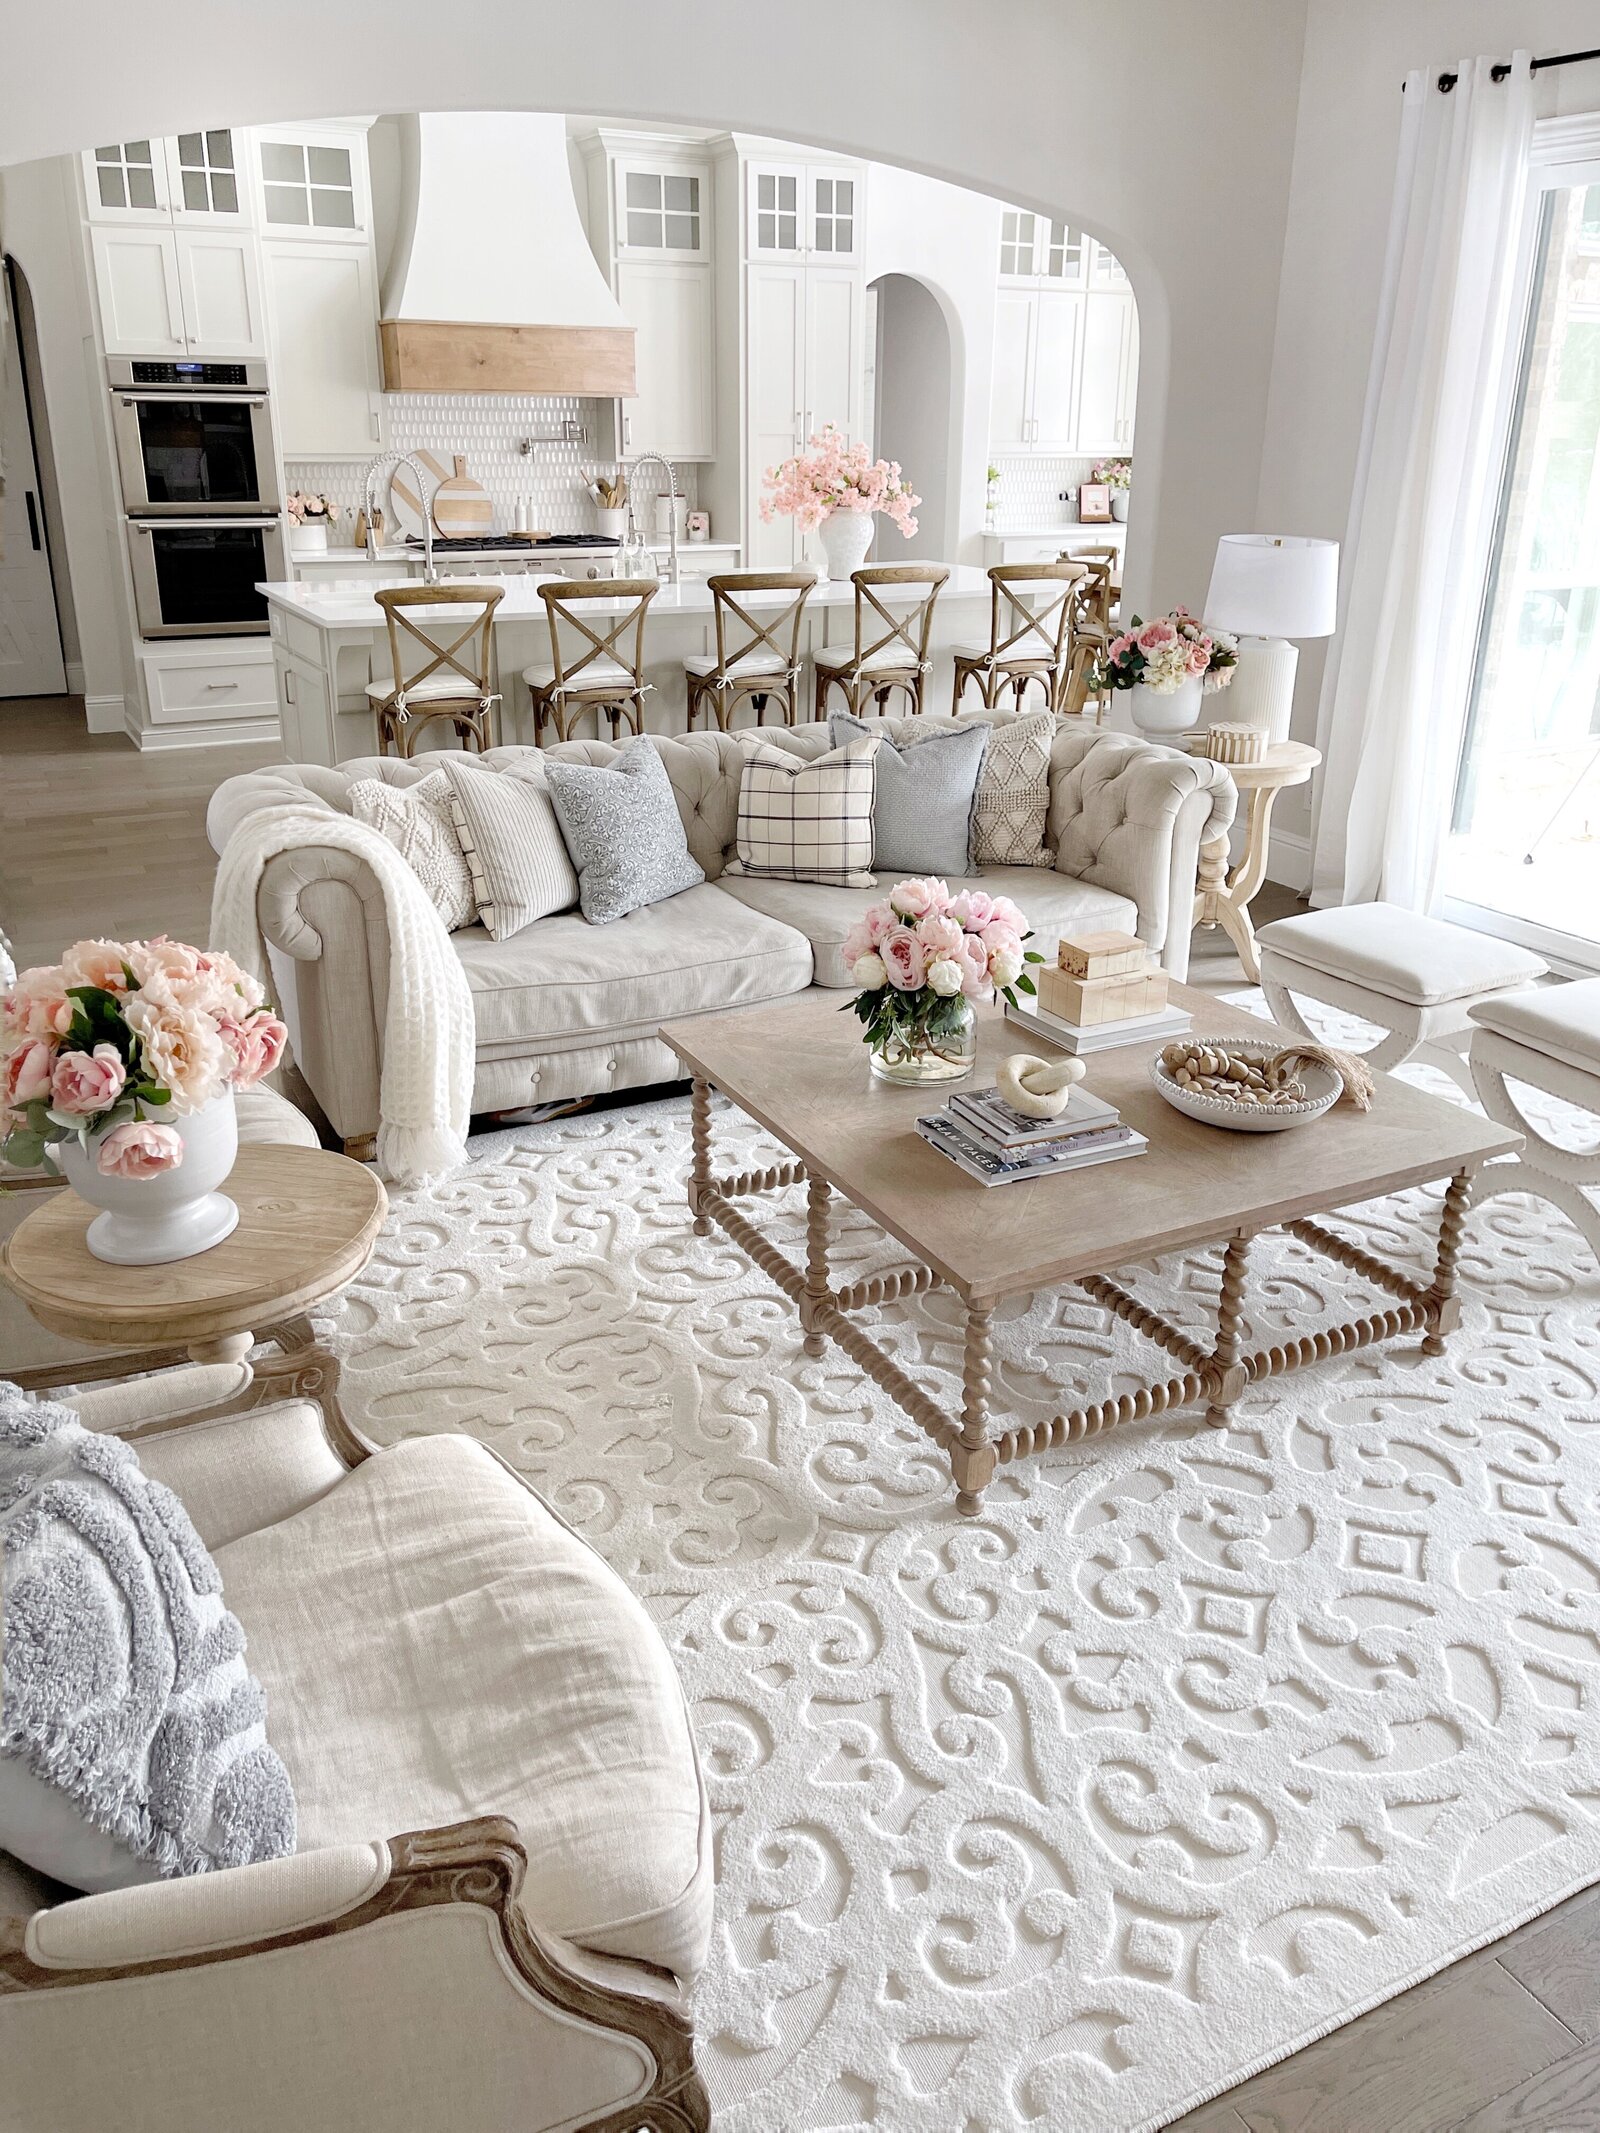 Bird's eye view of a living room space featuring decor from multiple MTH collections